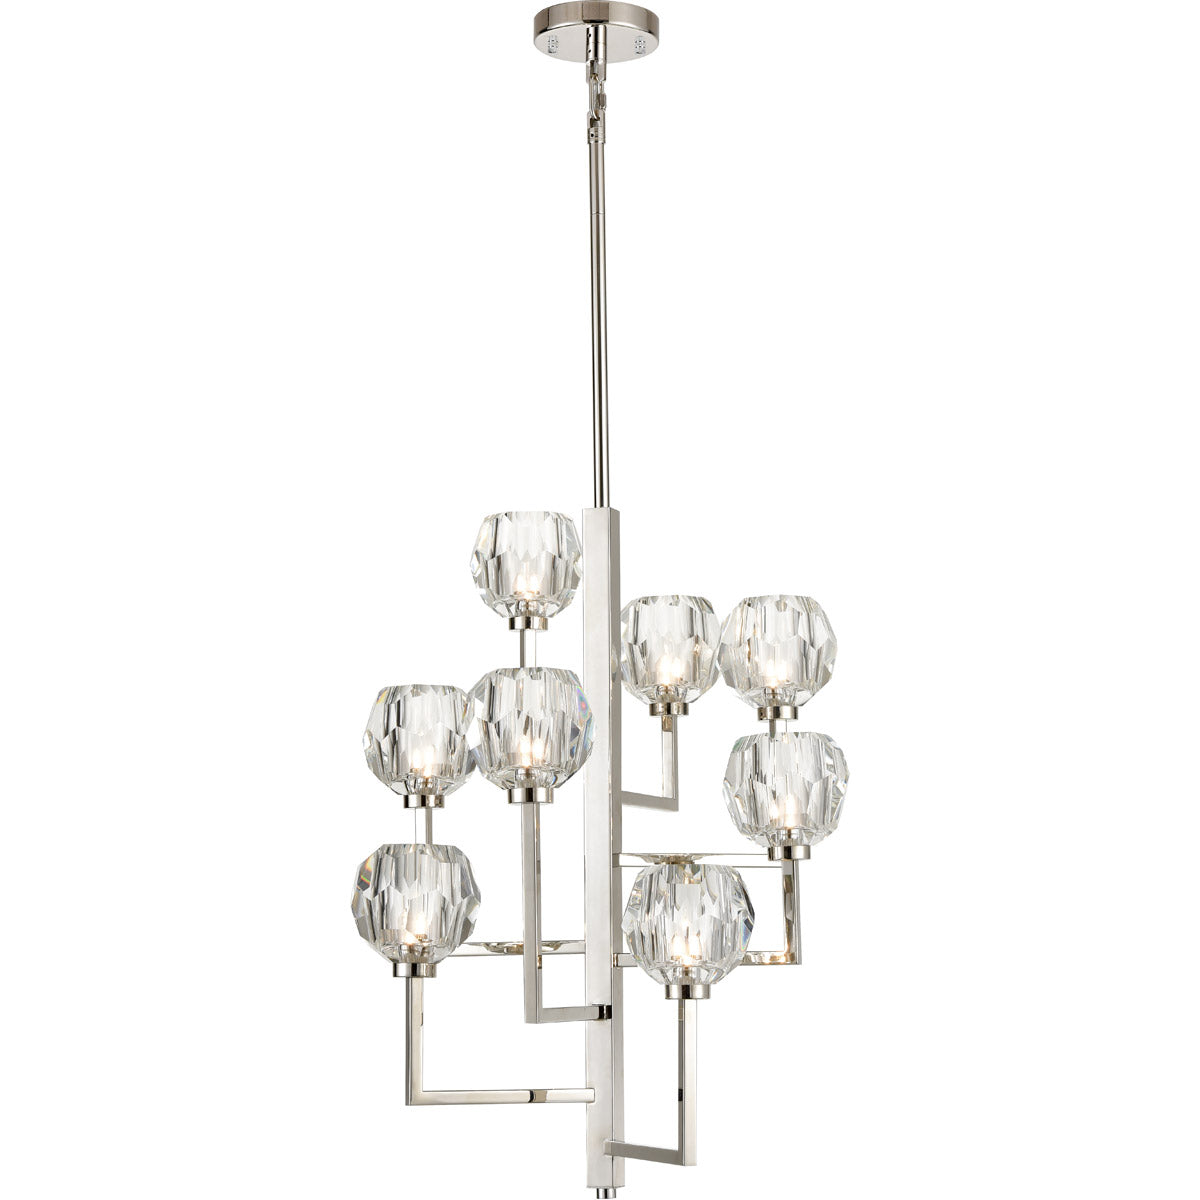 Steel Square Arms with Clear Crystal Shade Chandelier